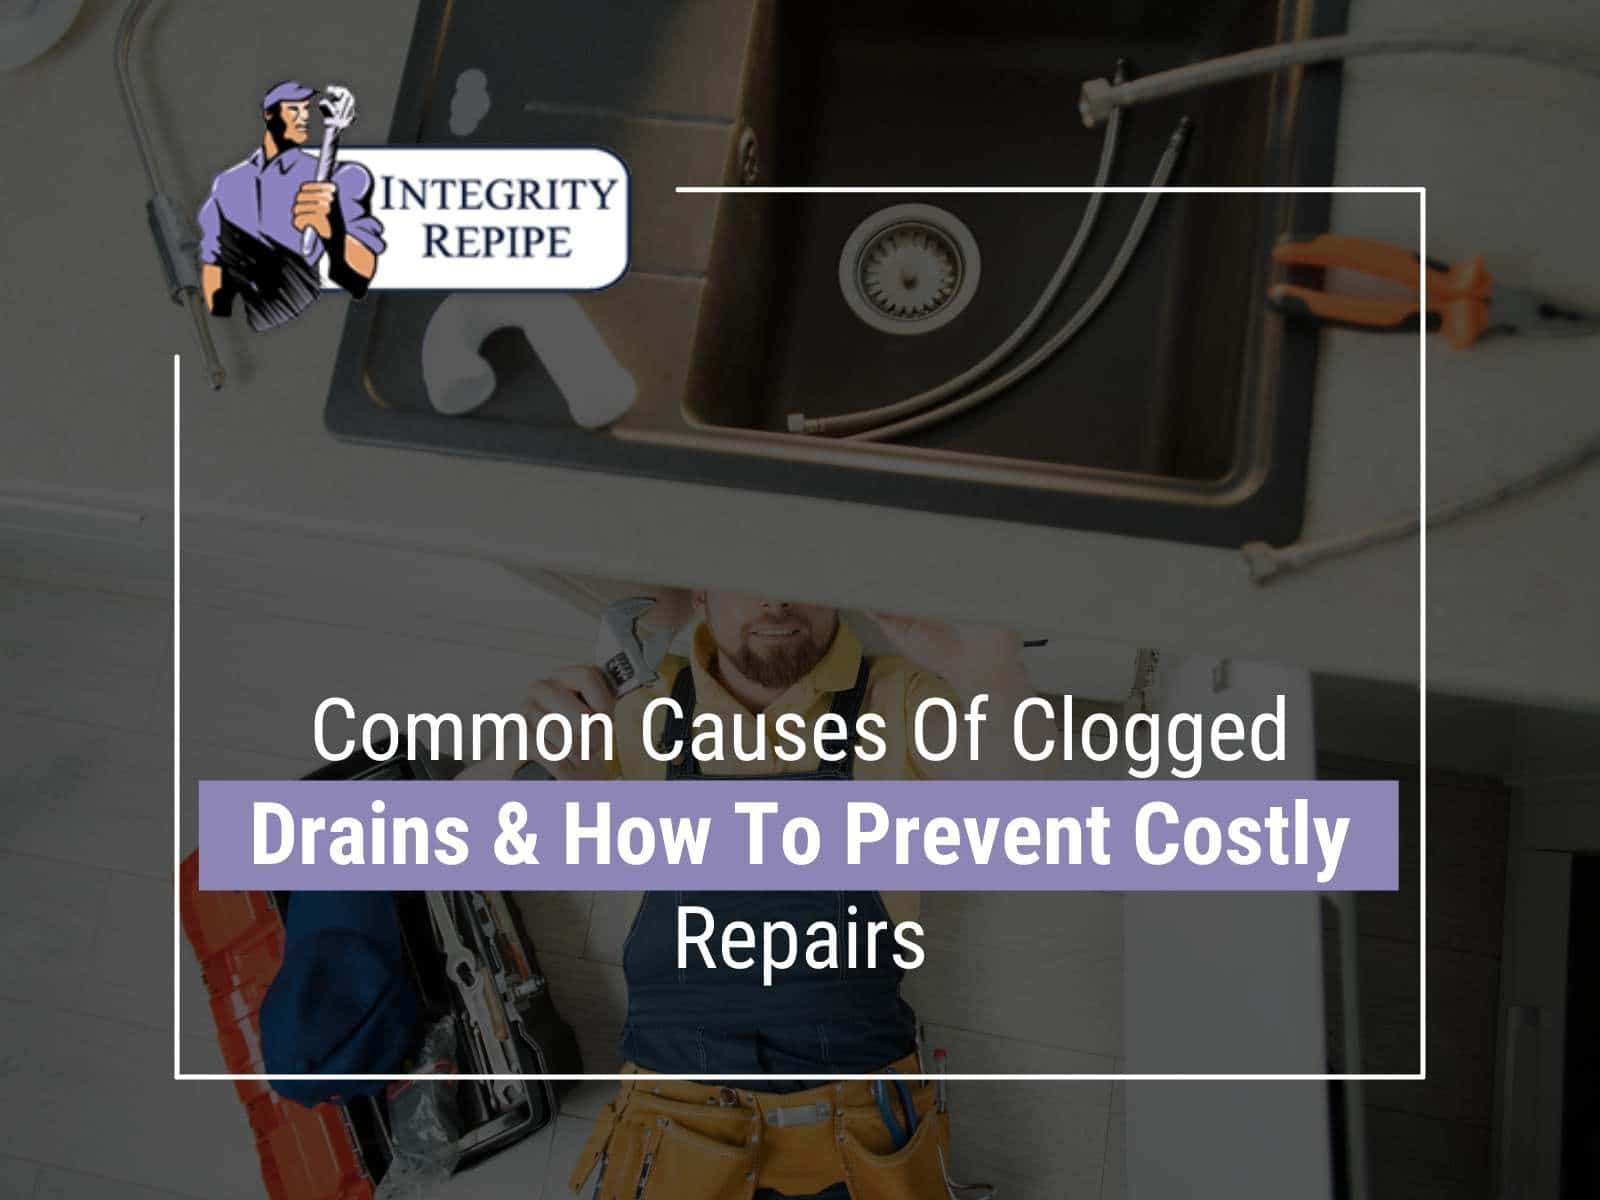 Common Causes Of Clogged Drains And How To Prevent Repairs